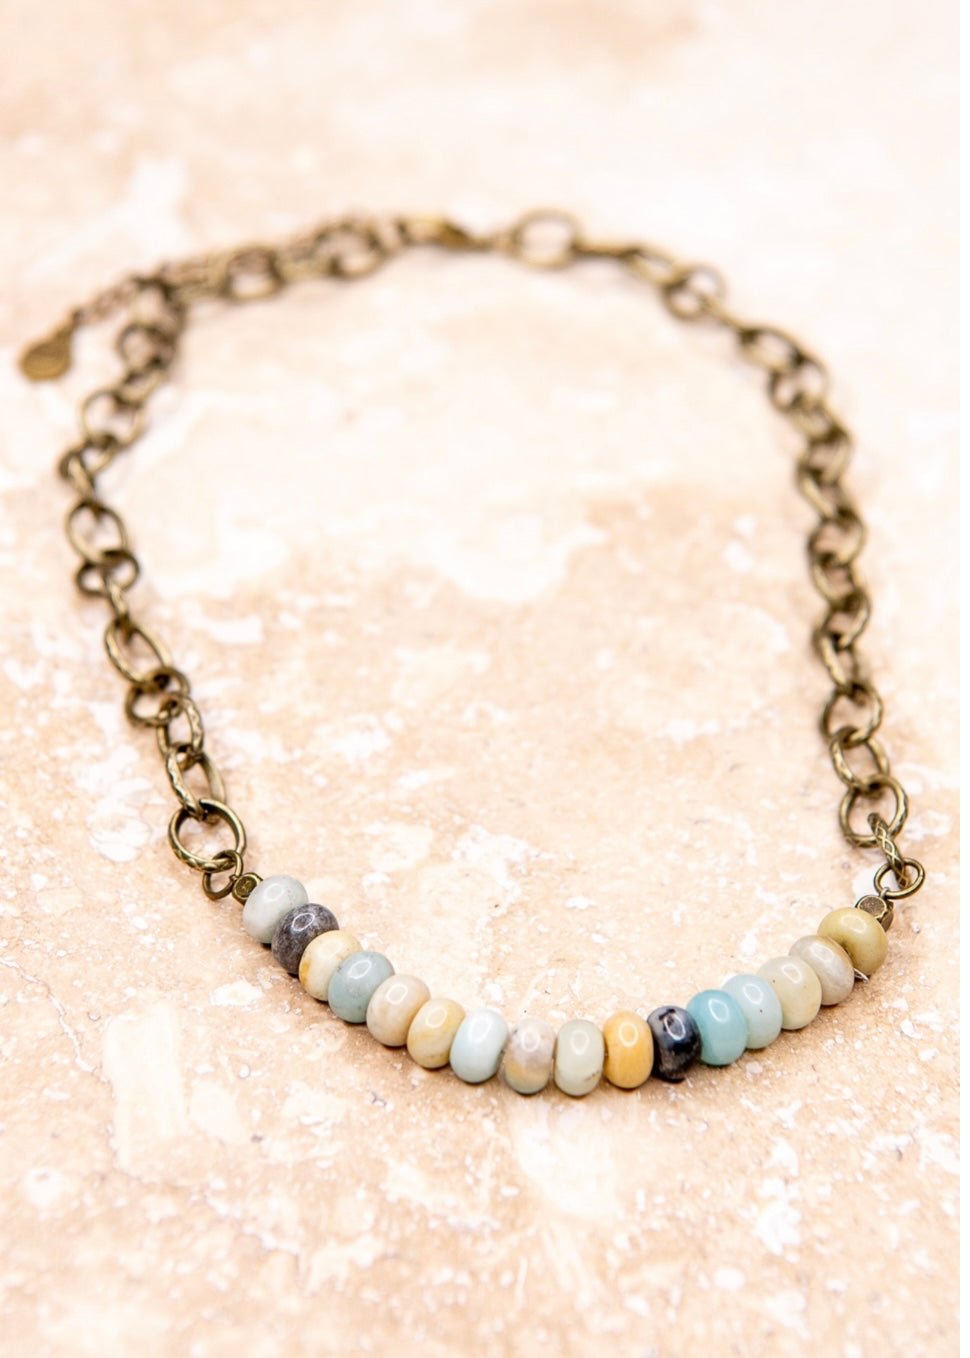 Victoria Necklace - Amazonite - Necklaces -Jimberly's Boutique-Olive Branch-Mississippi